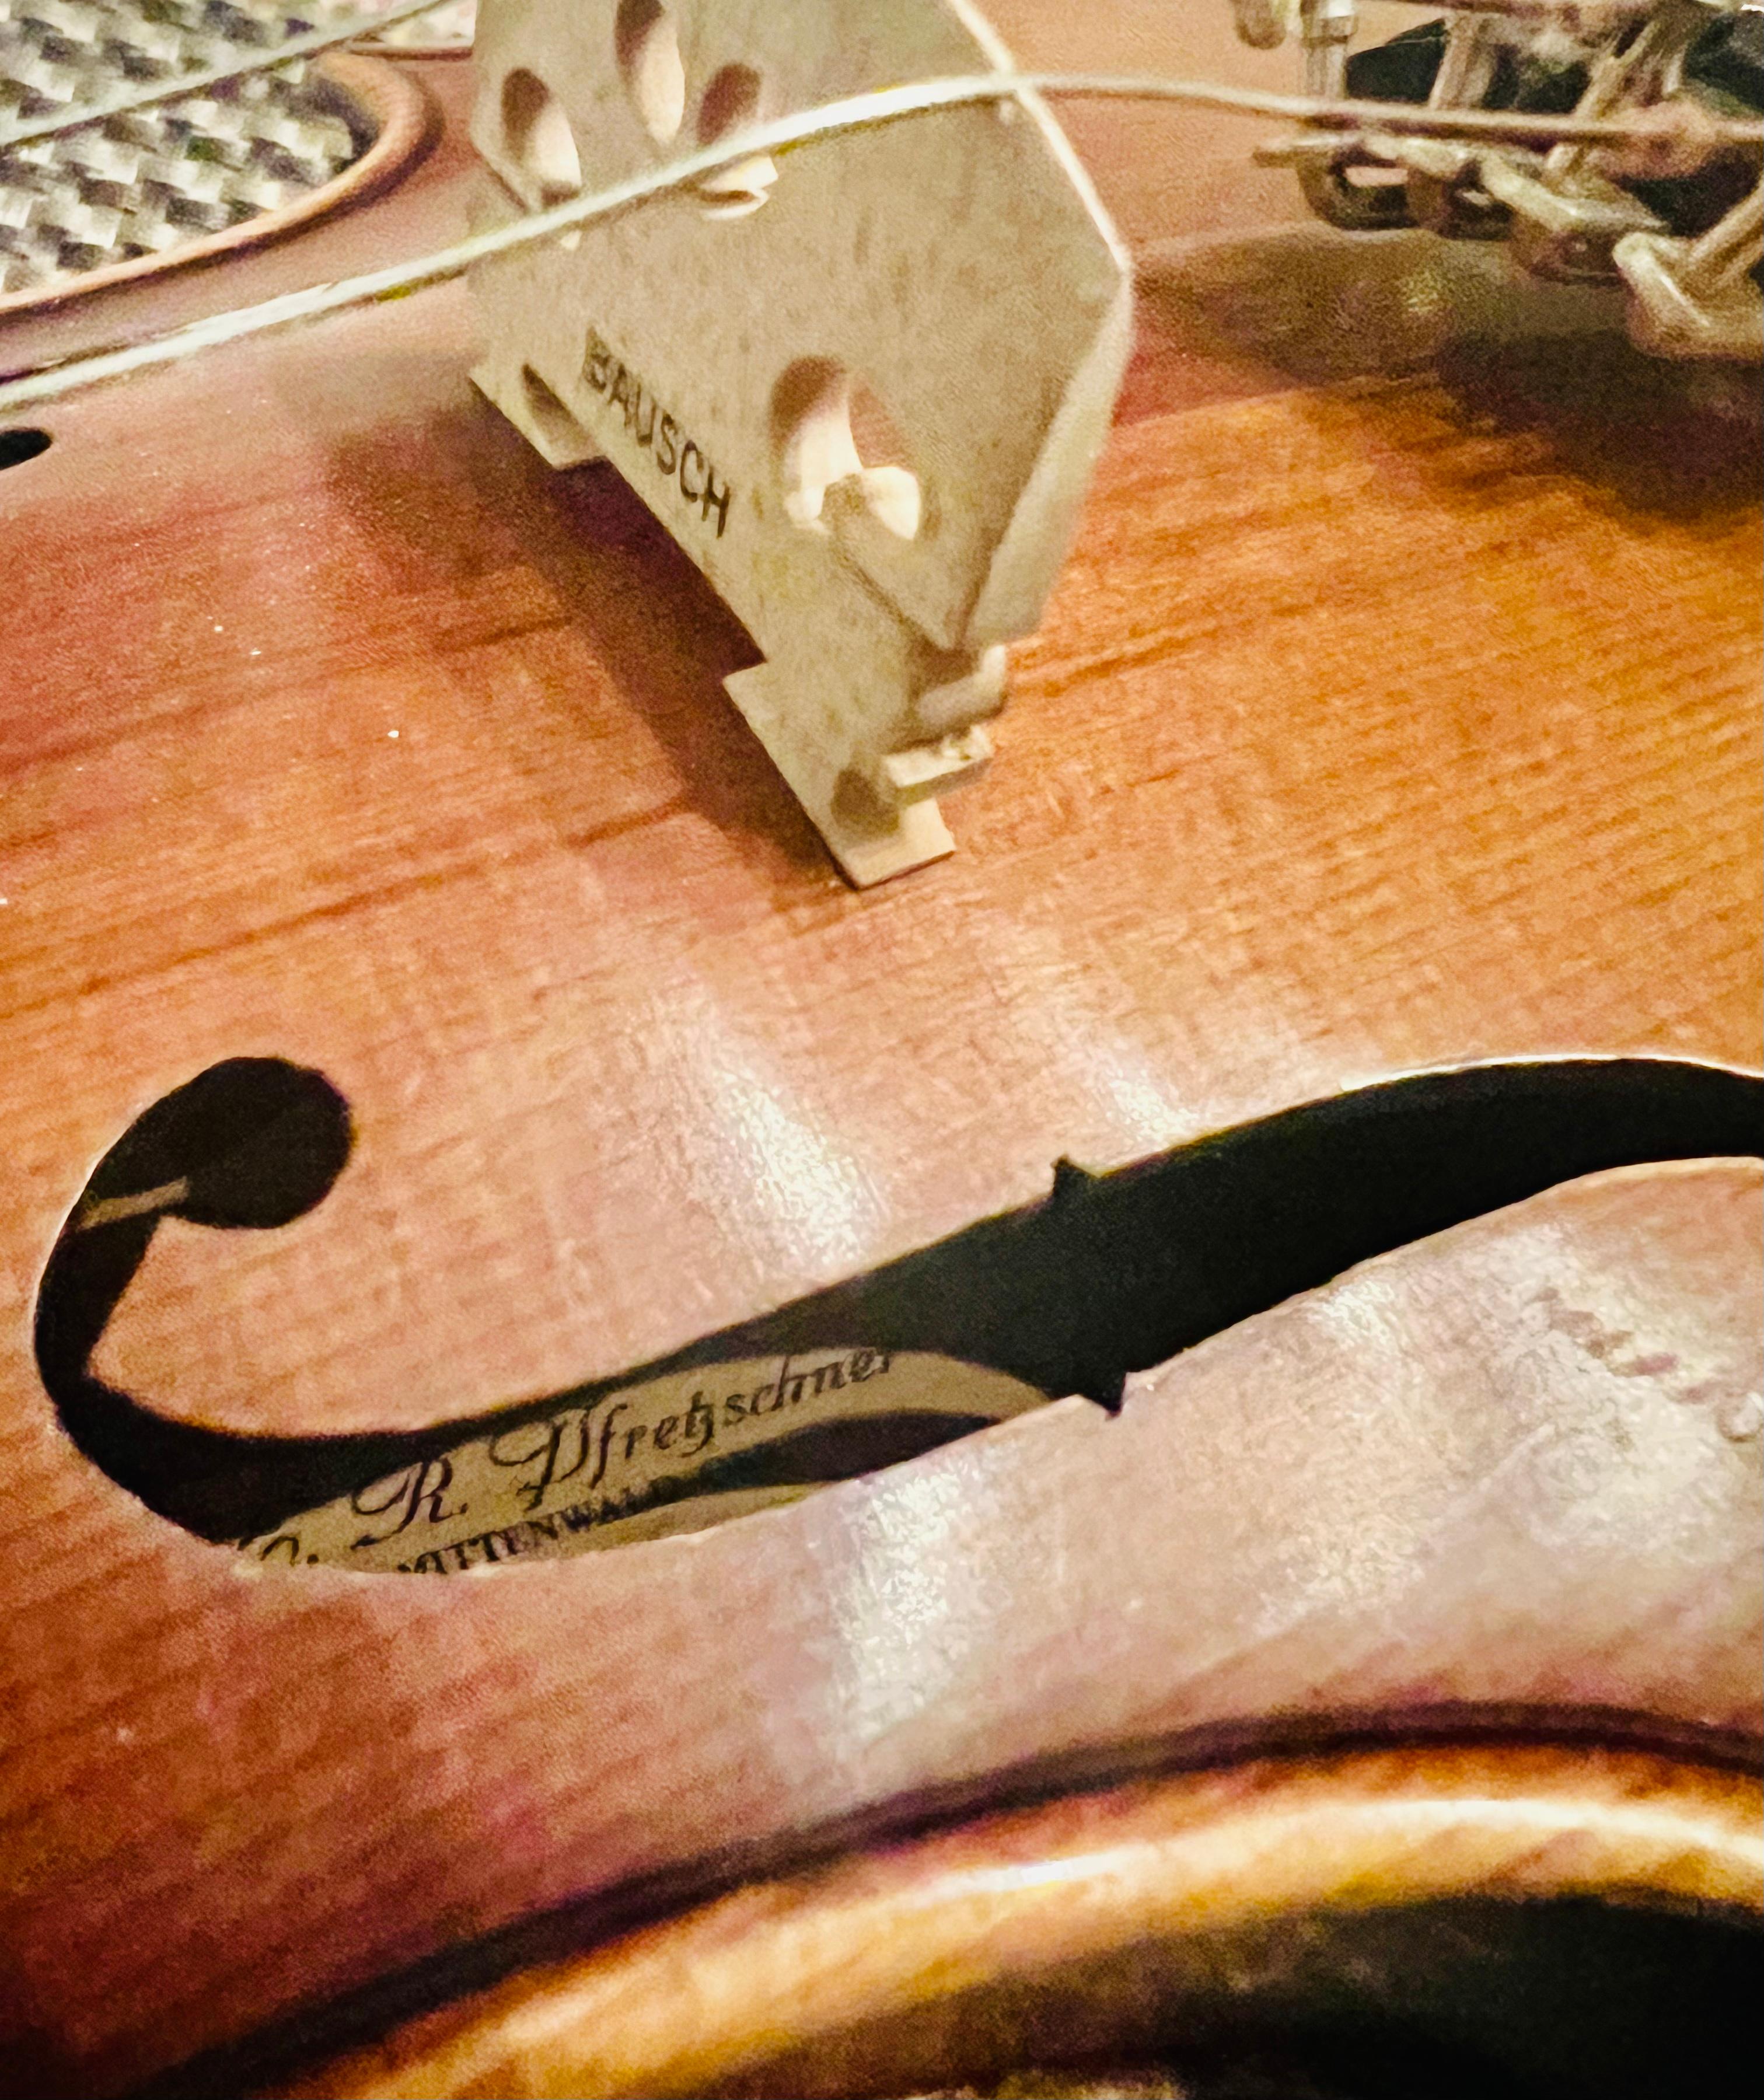 1970 3/4 E.R. Pfretzschner Hand-Crafted Violin in the Style of A. Stradivarius For Sale 8